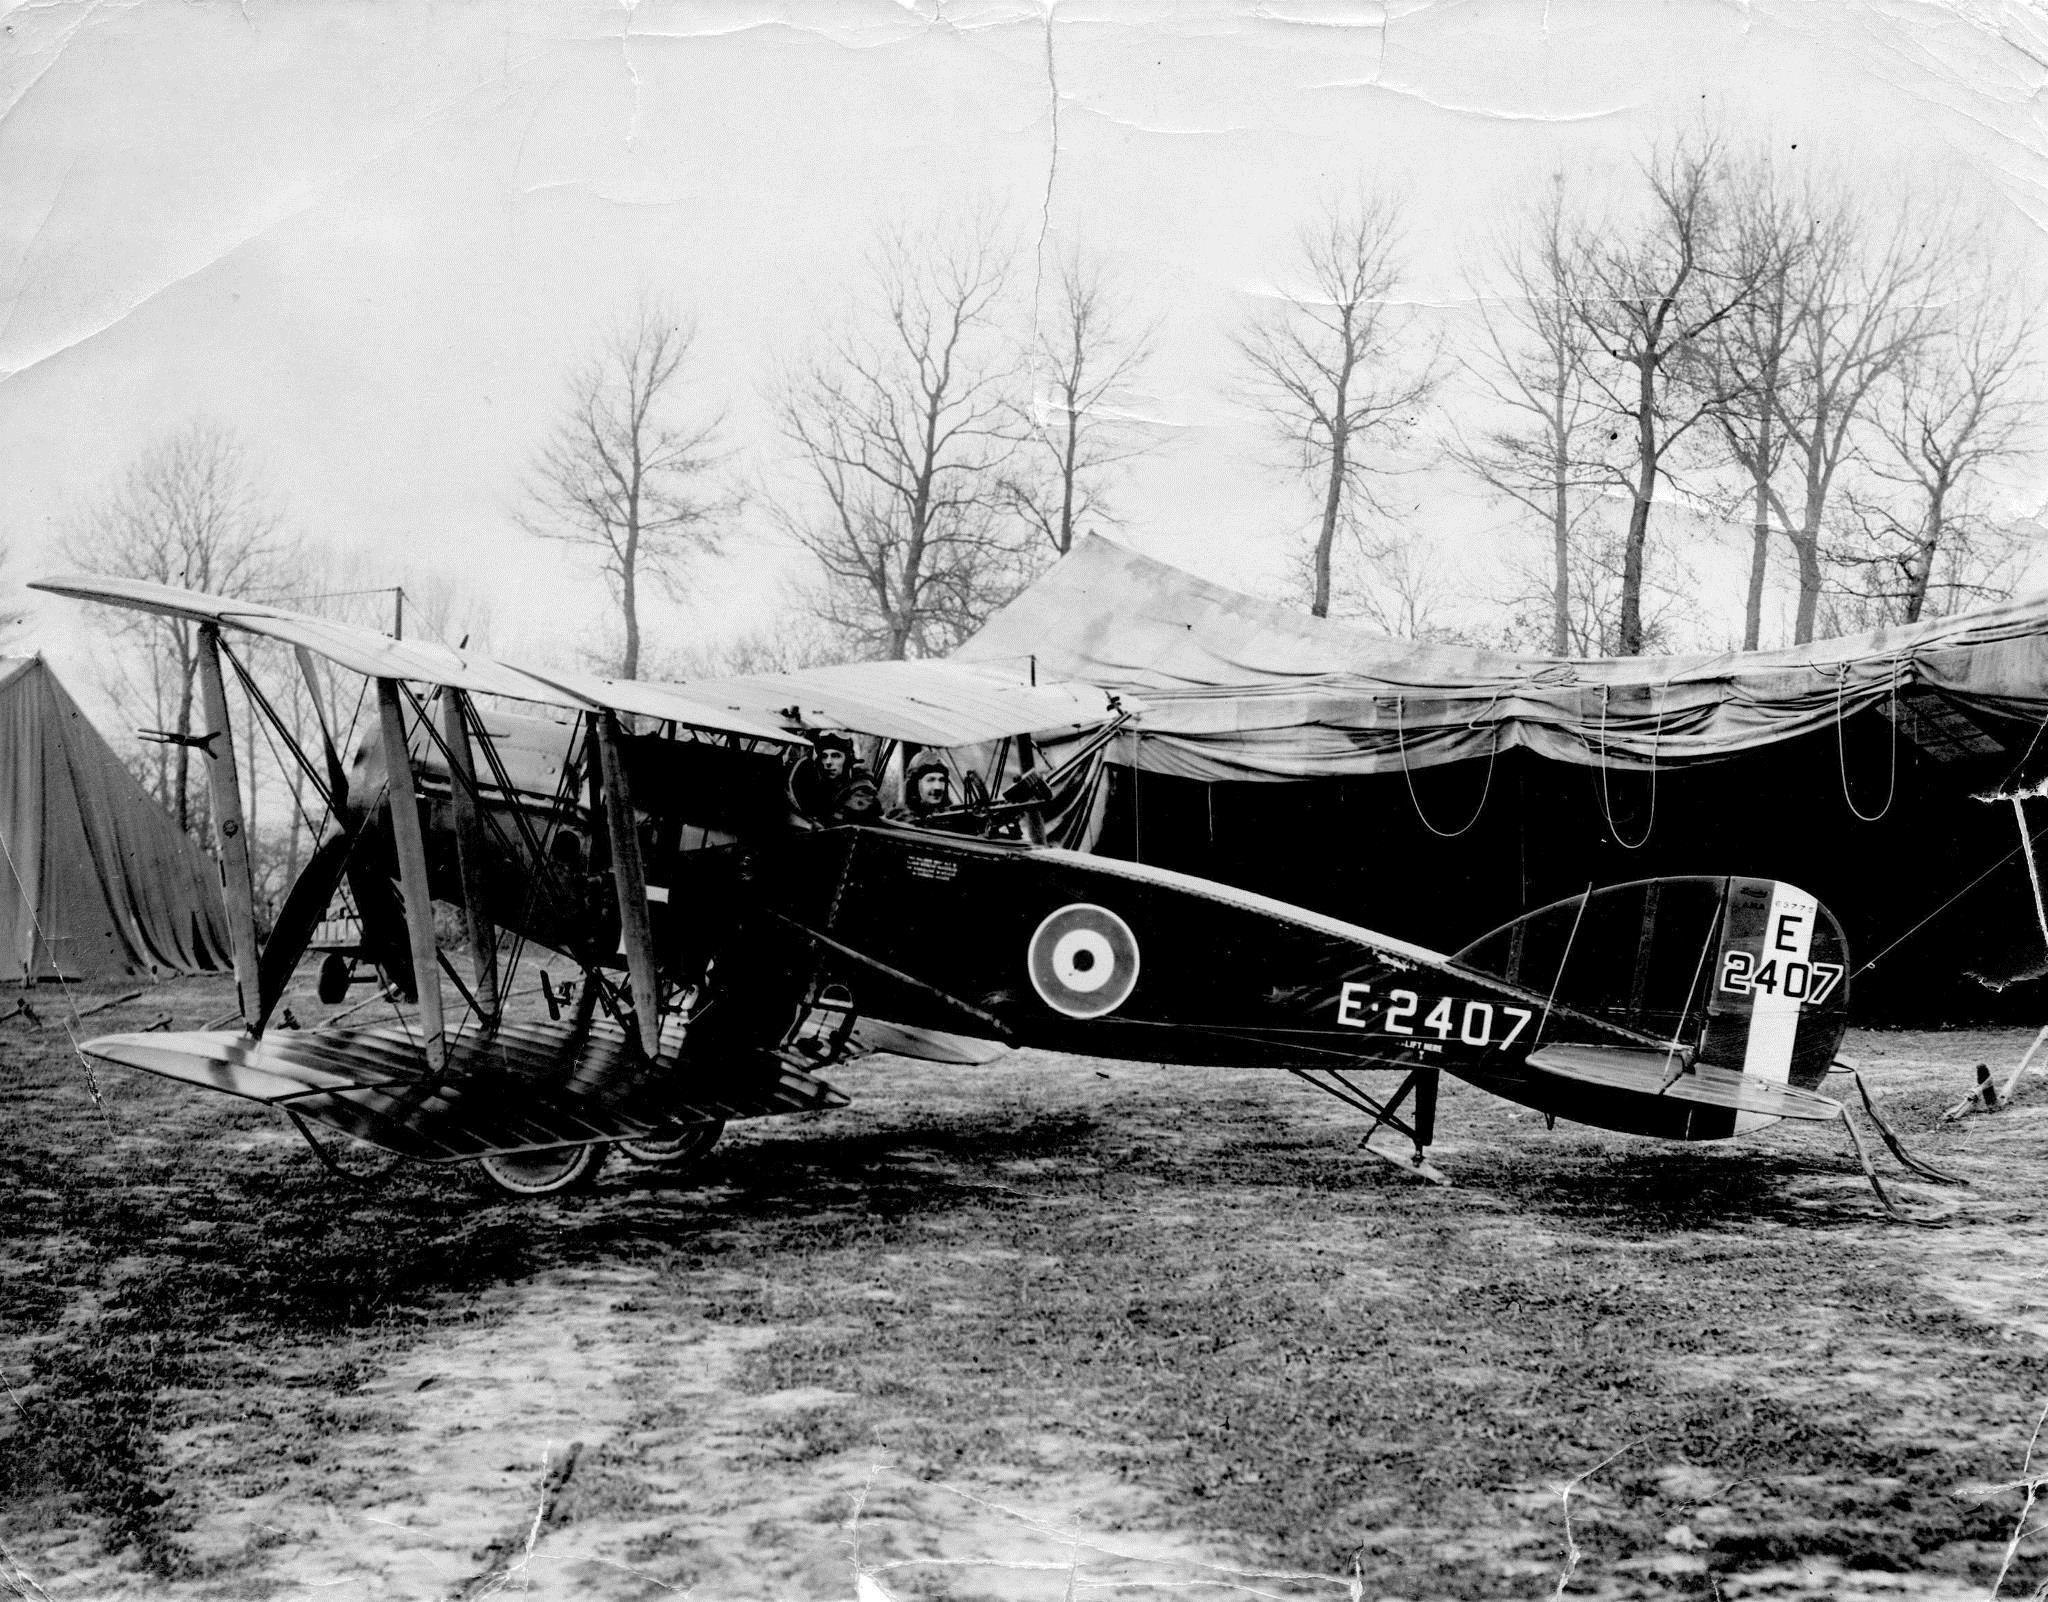 Captain Horace Percy Lale and Lieutenant WH Welsh of the Royal Flying Corps in their two-seater Bristol Fighter plane